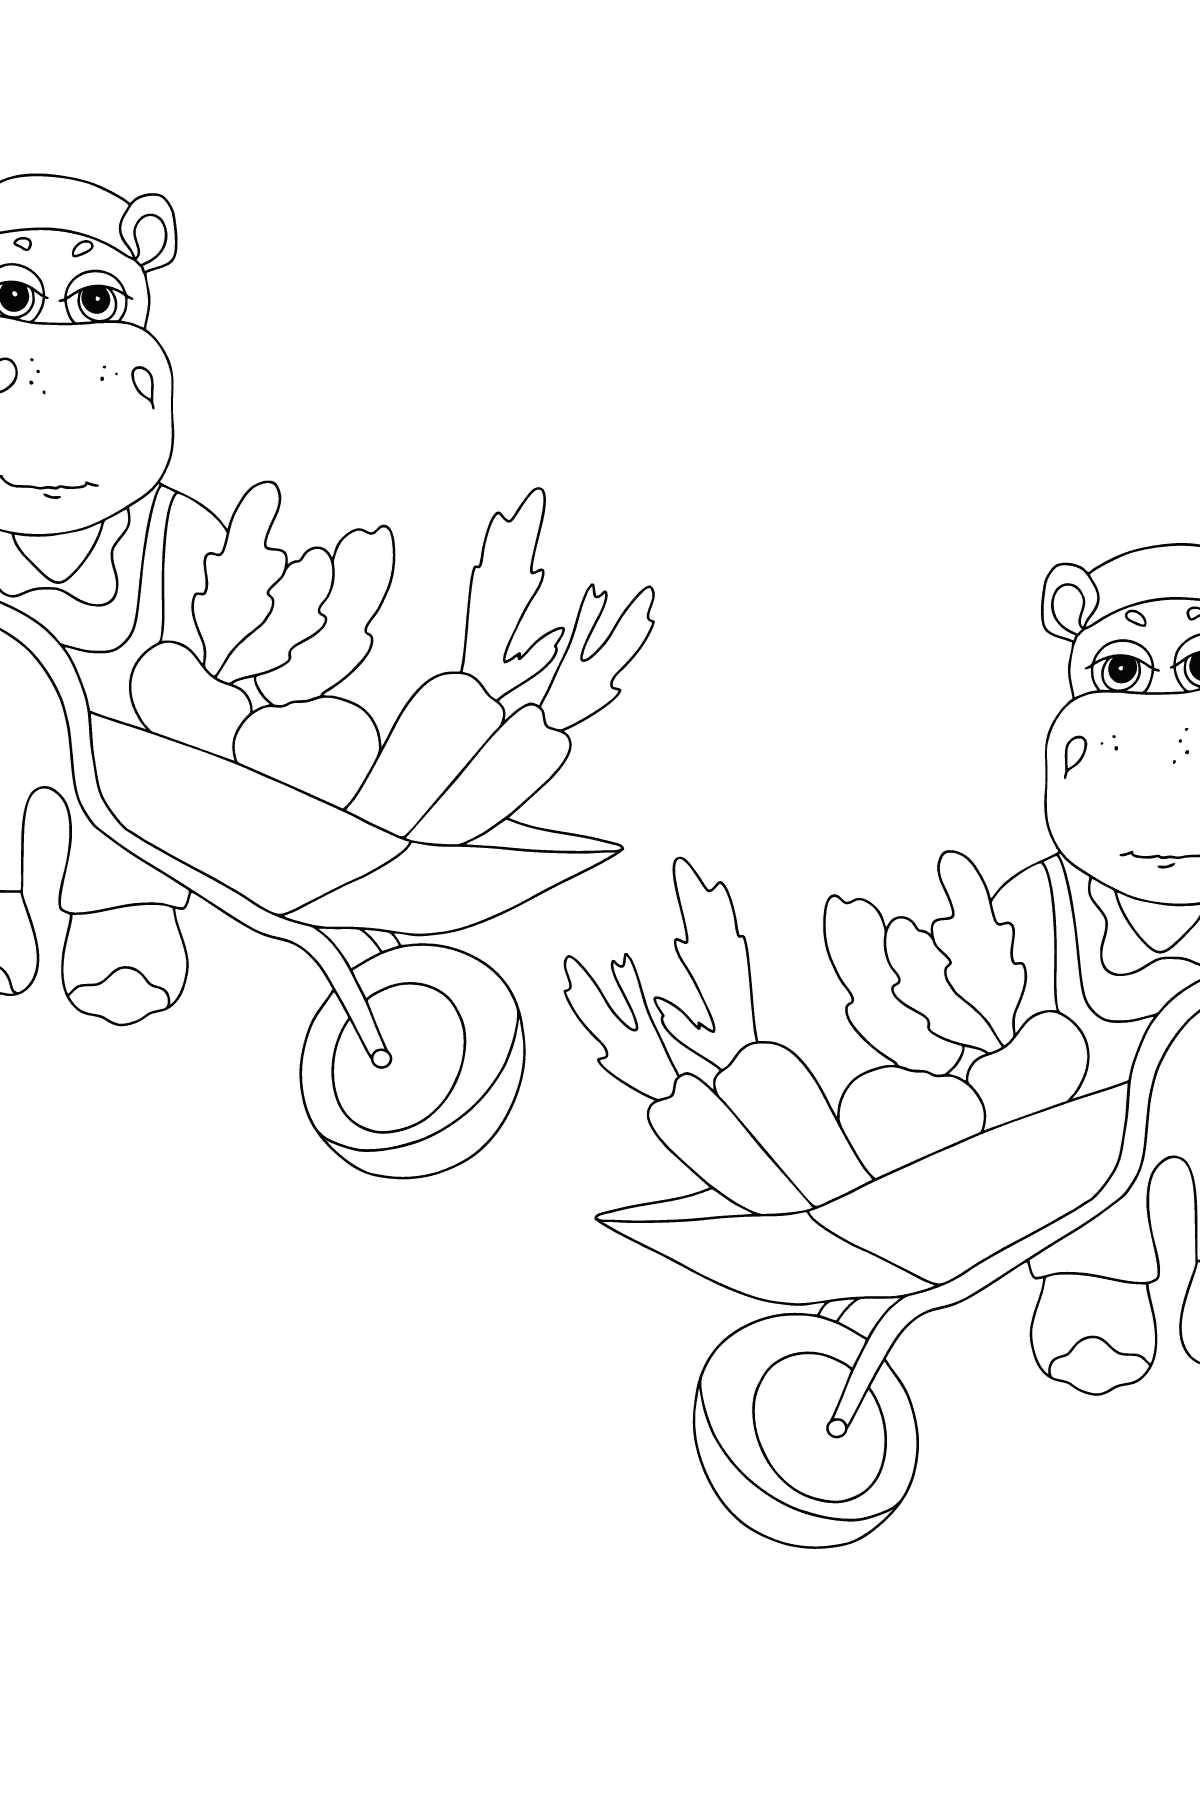 Coloring Page - Hippos in a Garden with Carts for Children 